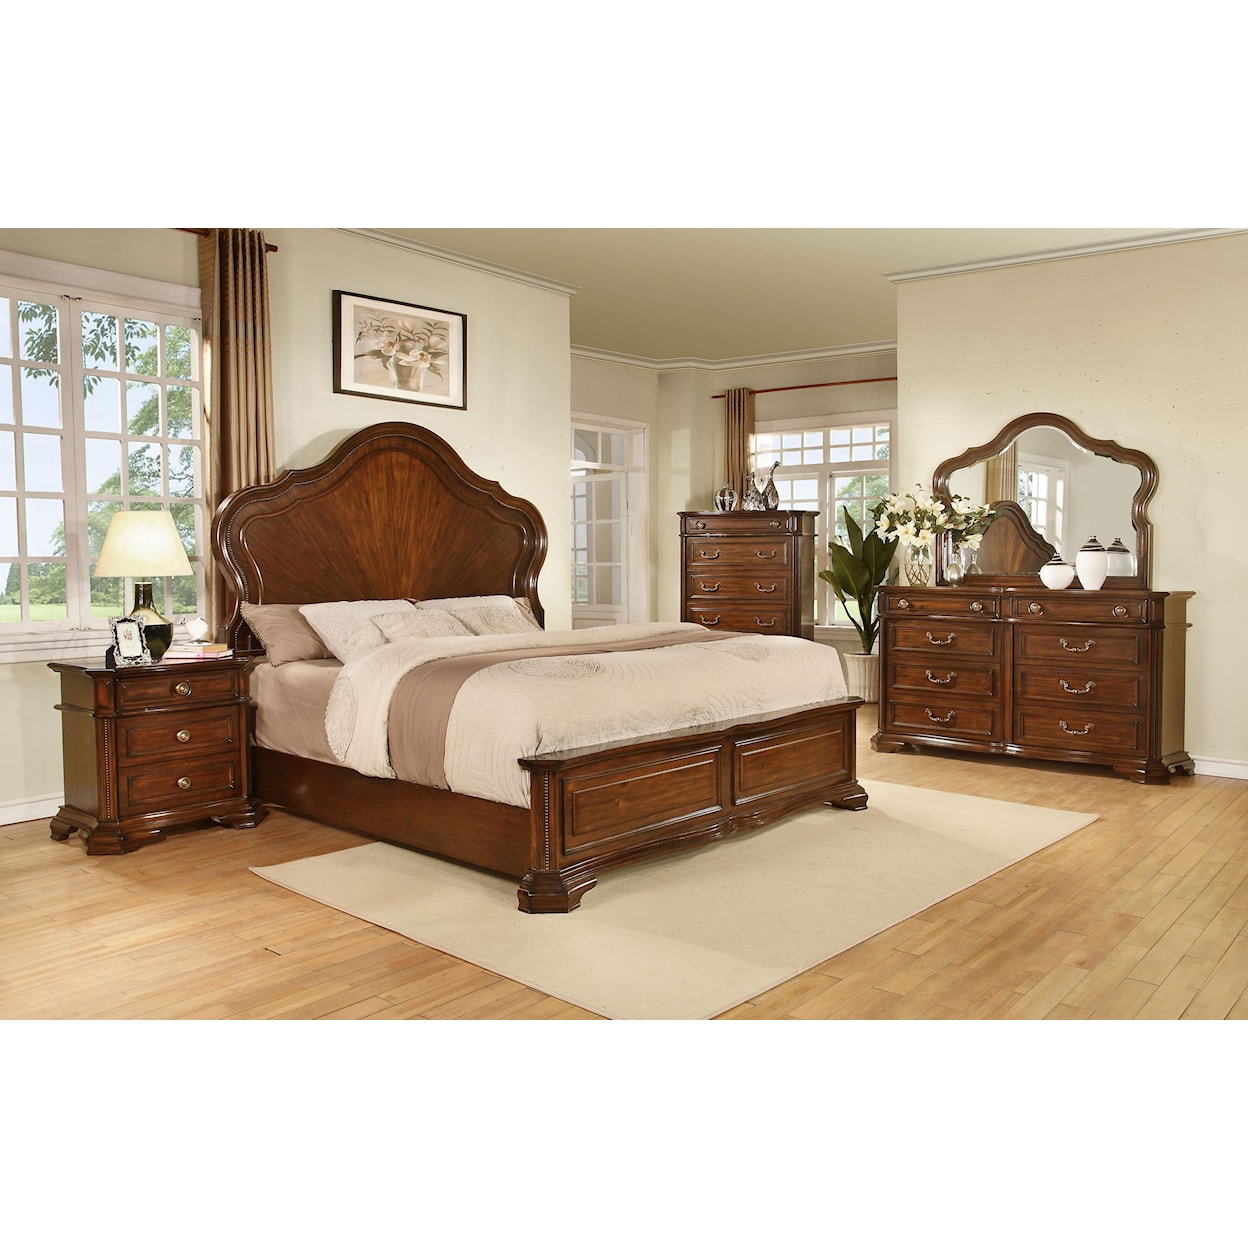 Avalon Furniture B00310 Queen Bedroom Group